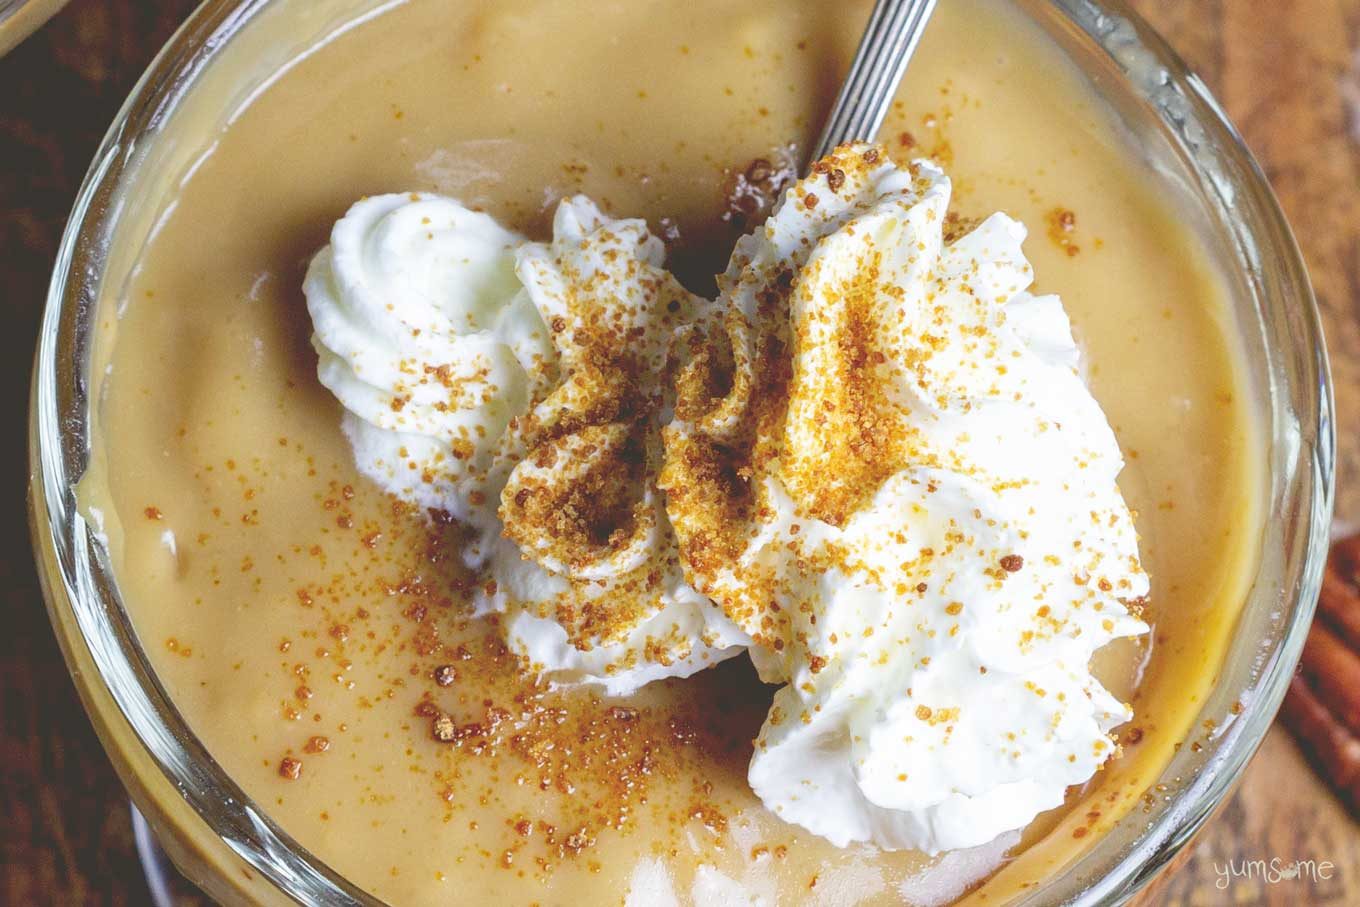 Overhead view of vegan butterscotch pudding, topped with whipped cream and brown sugar crystals.